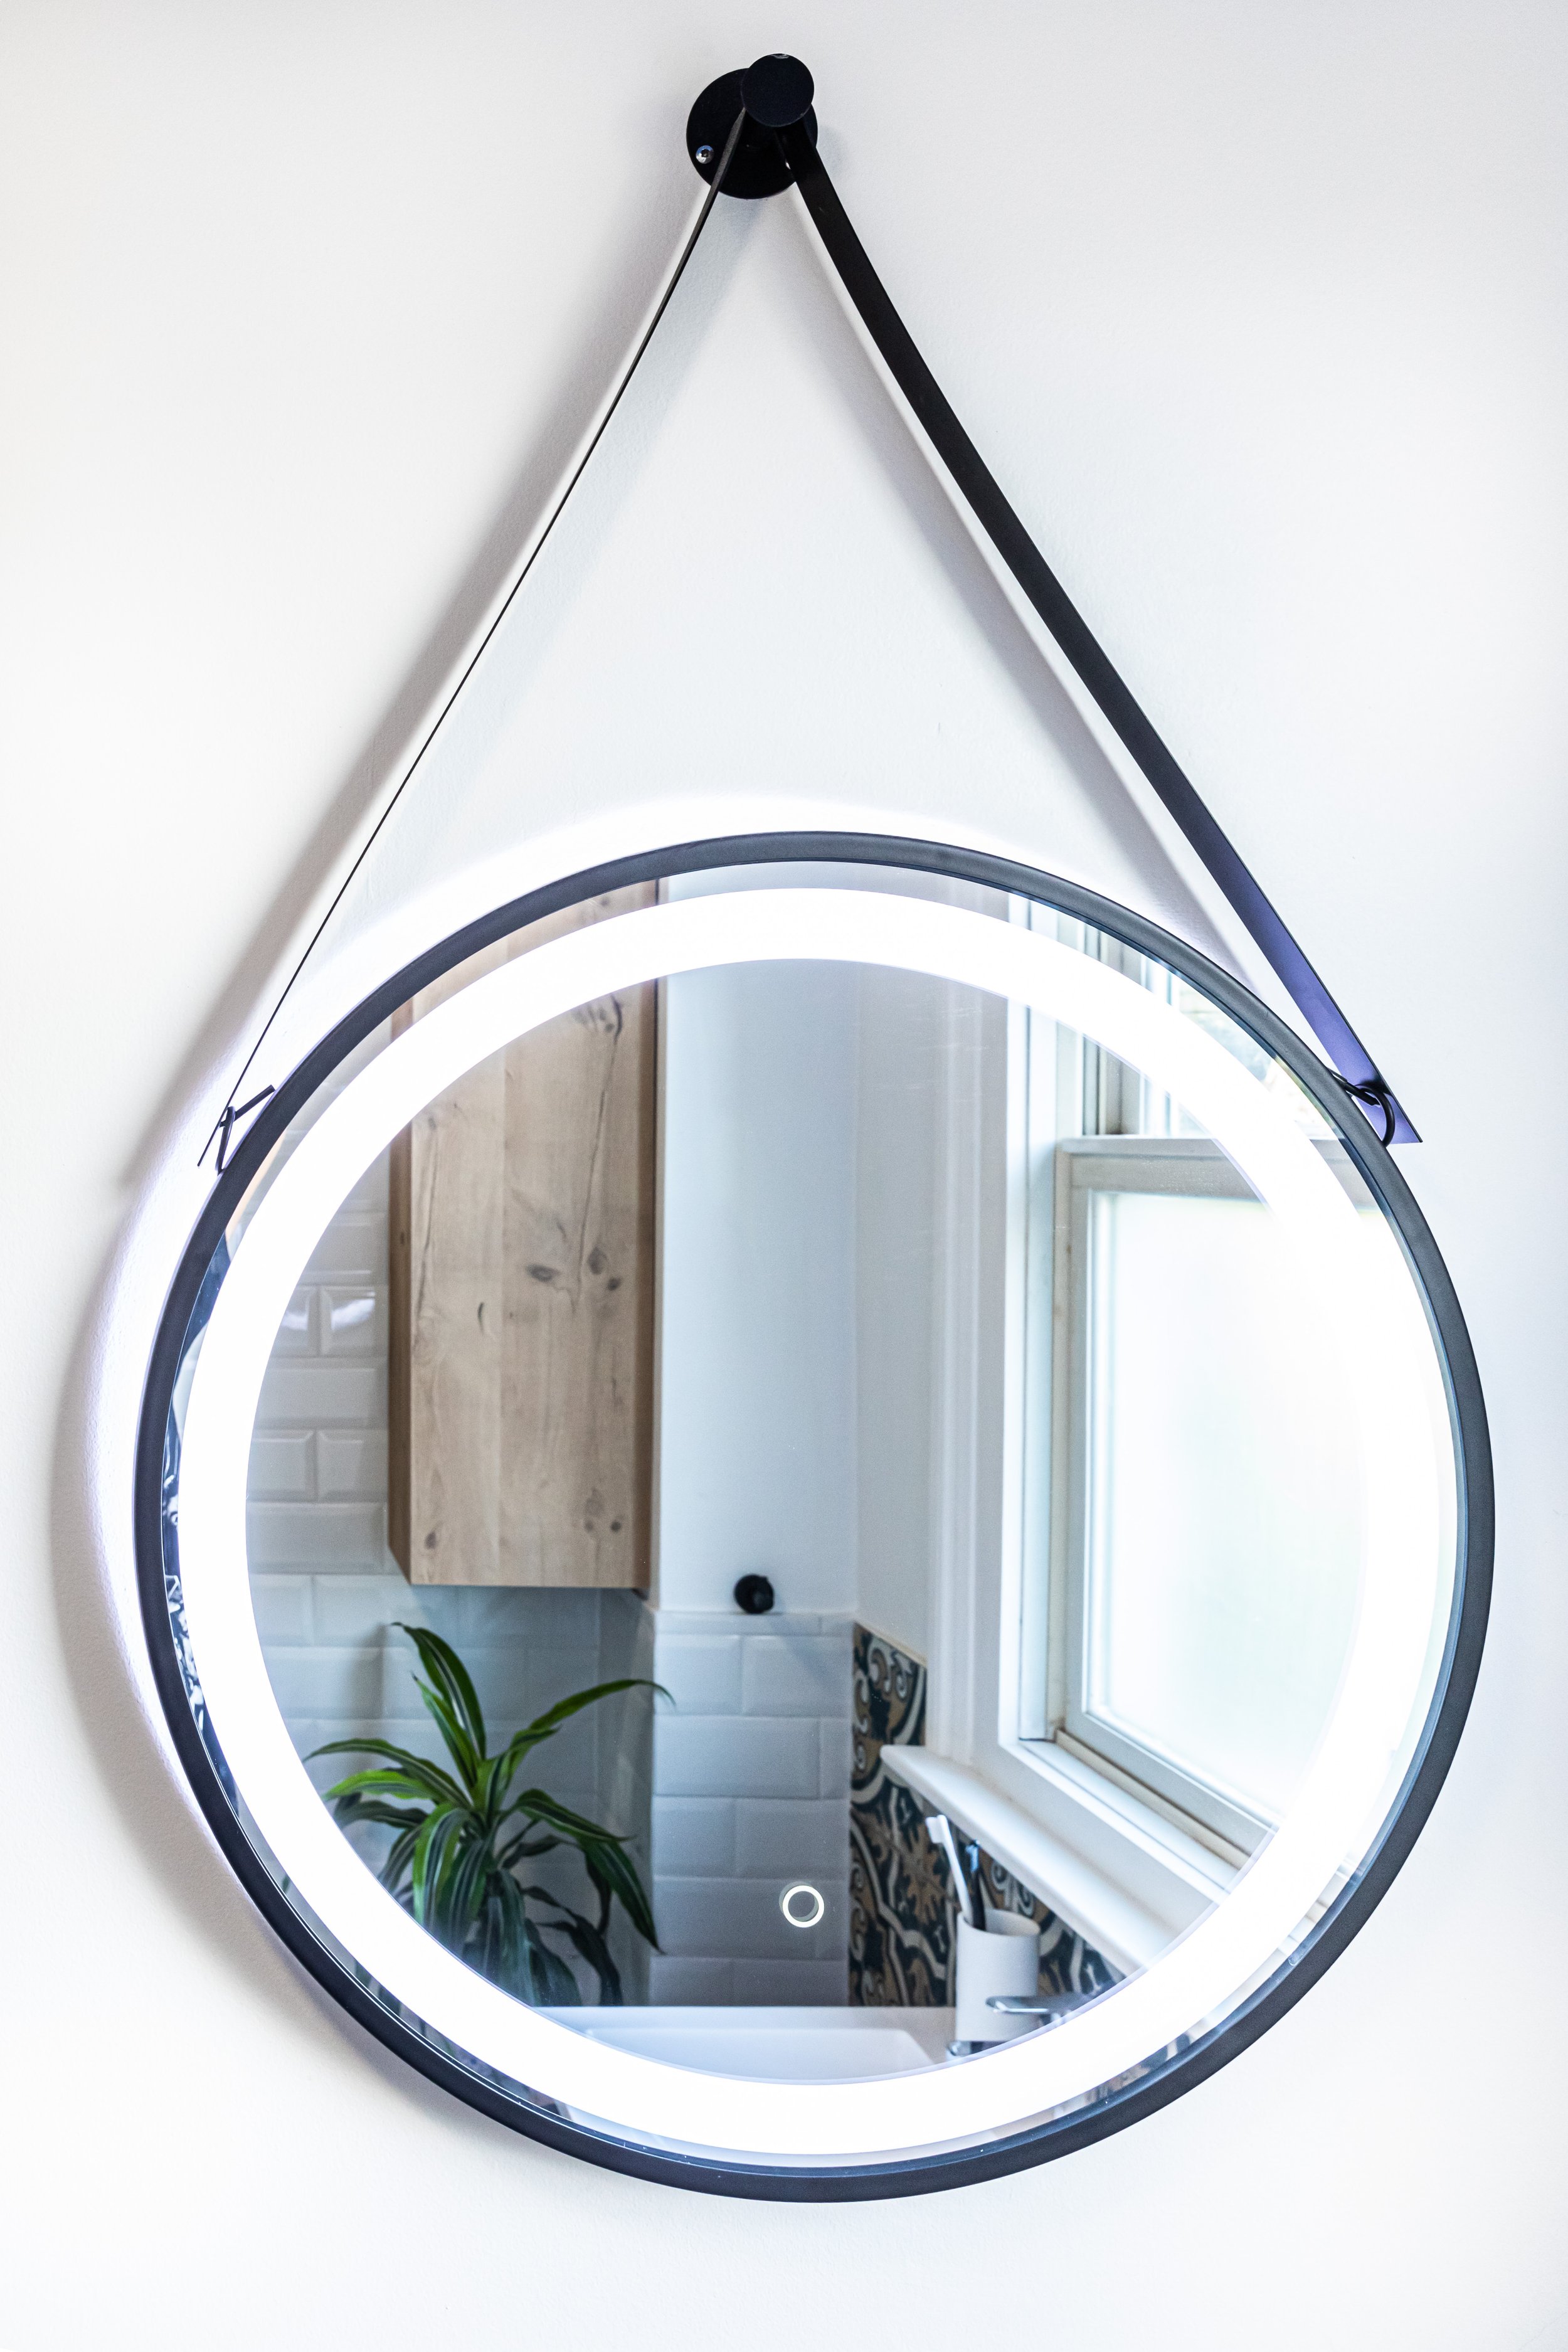 Bathroom industrial style round black mirror with light Orsetto Interiors.jpg